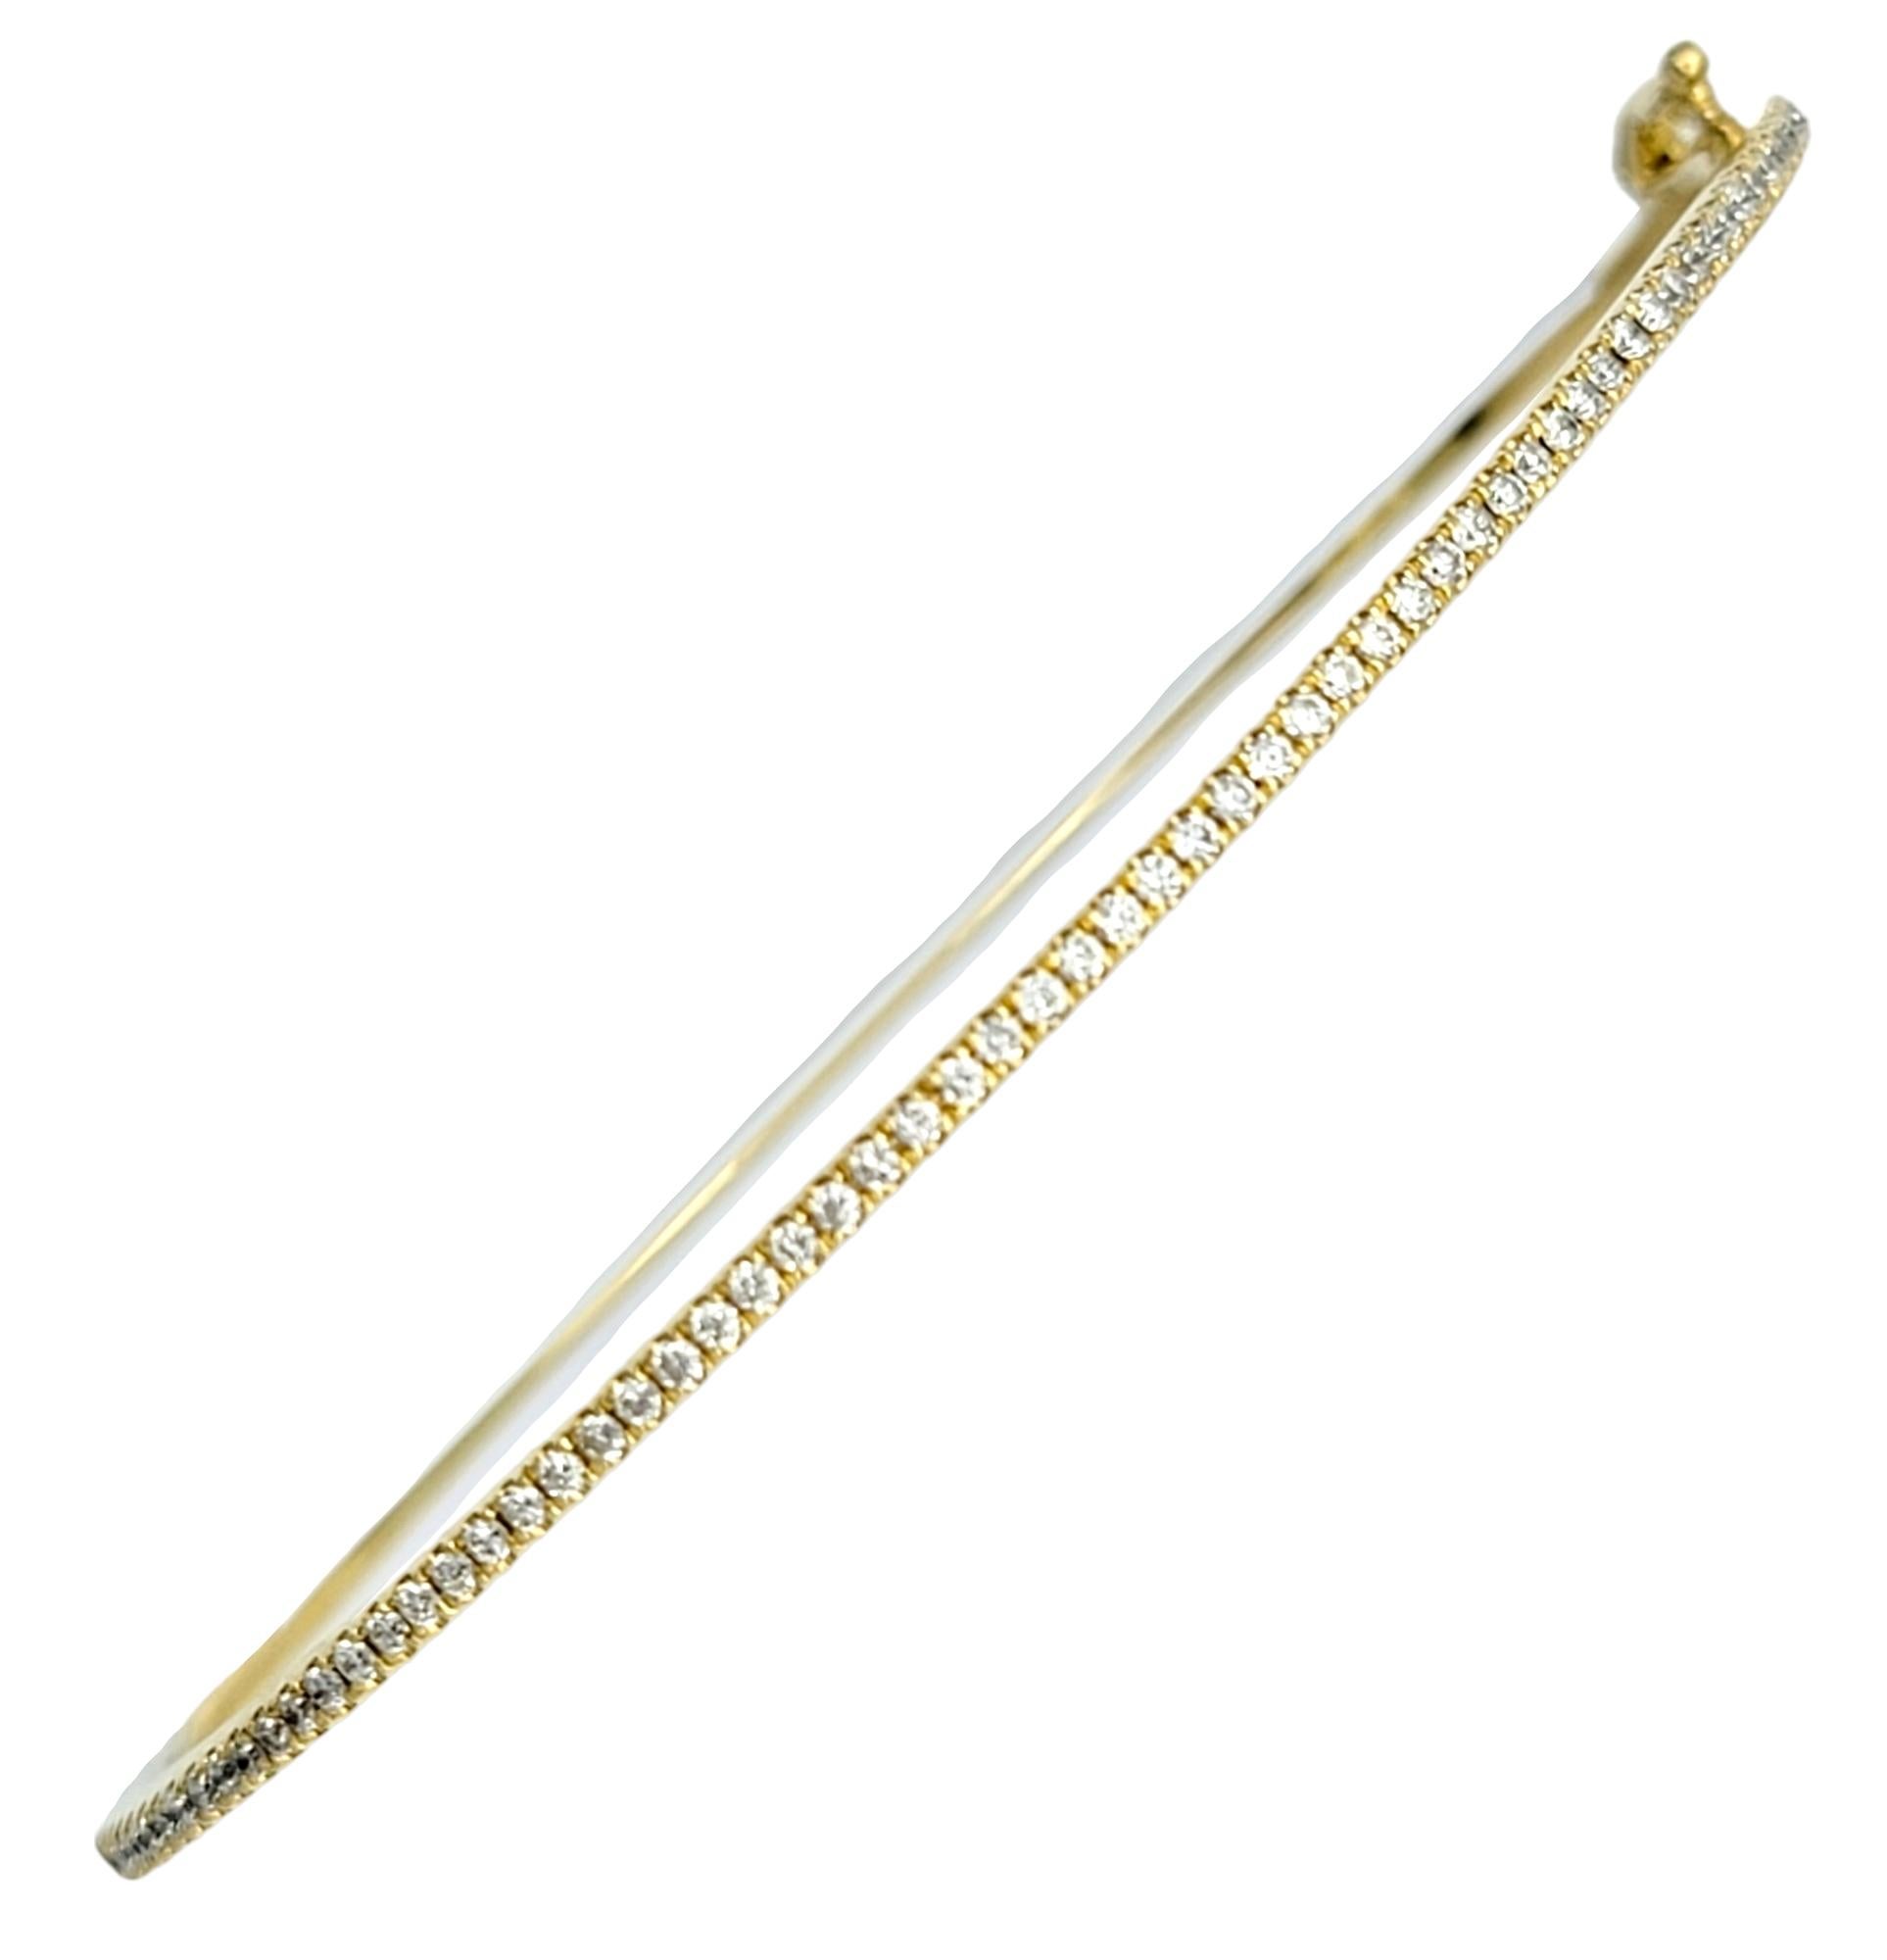 This sleek and striking 18 karat yellow gold bangle, created by Bony Levy, is a beautiful fusion of classic elegance and modern luxury. This delicate bangle displays a captivating contrast between the rich, warm hue of the 18 karat yellow gold and